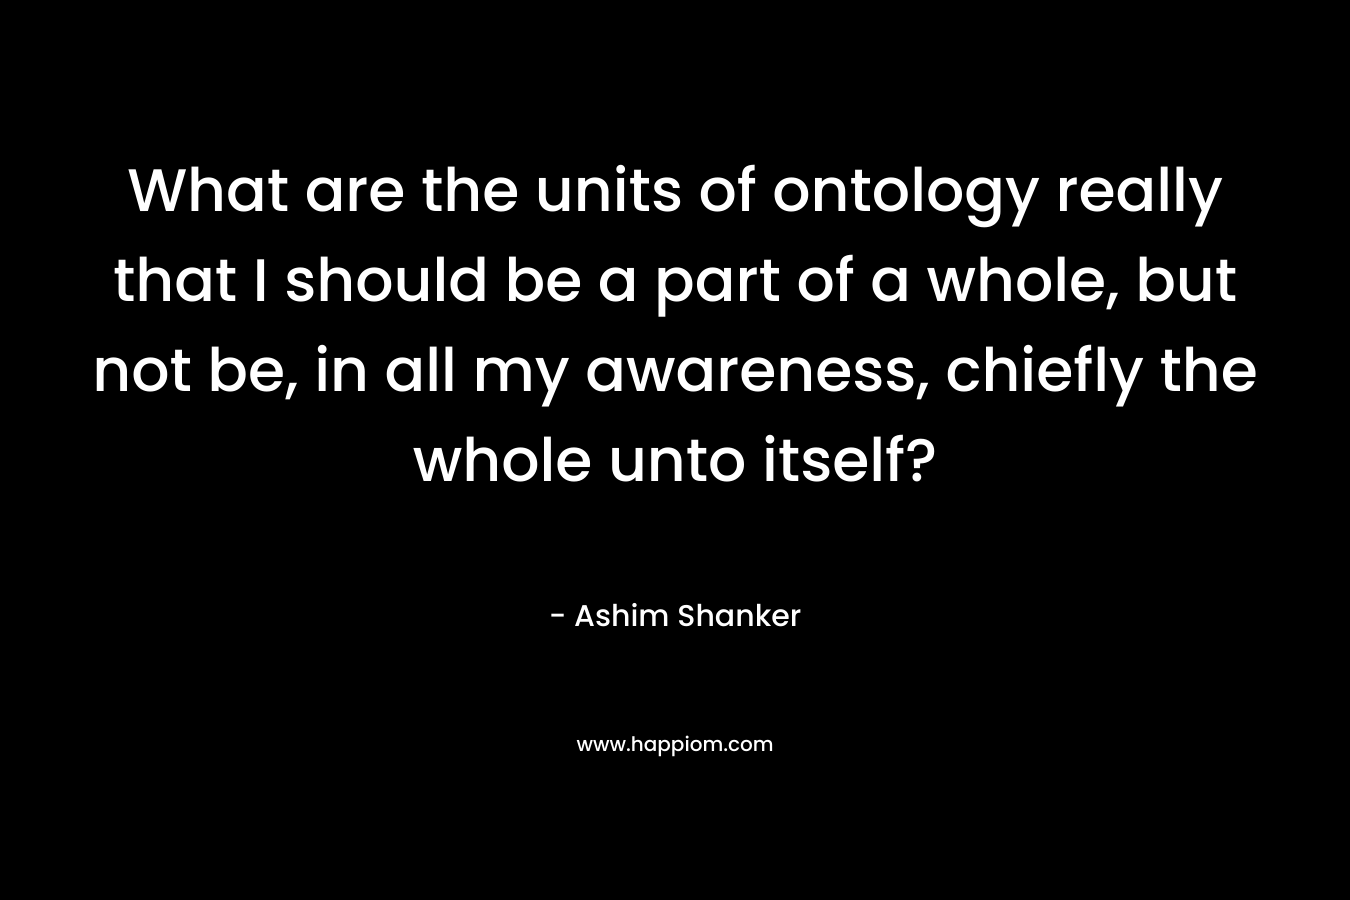 What are the units of ontology really that I should be a part of a whole, but not be, in all my awareness, chiefly the whole unto itself? – Ashim Shanker